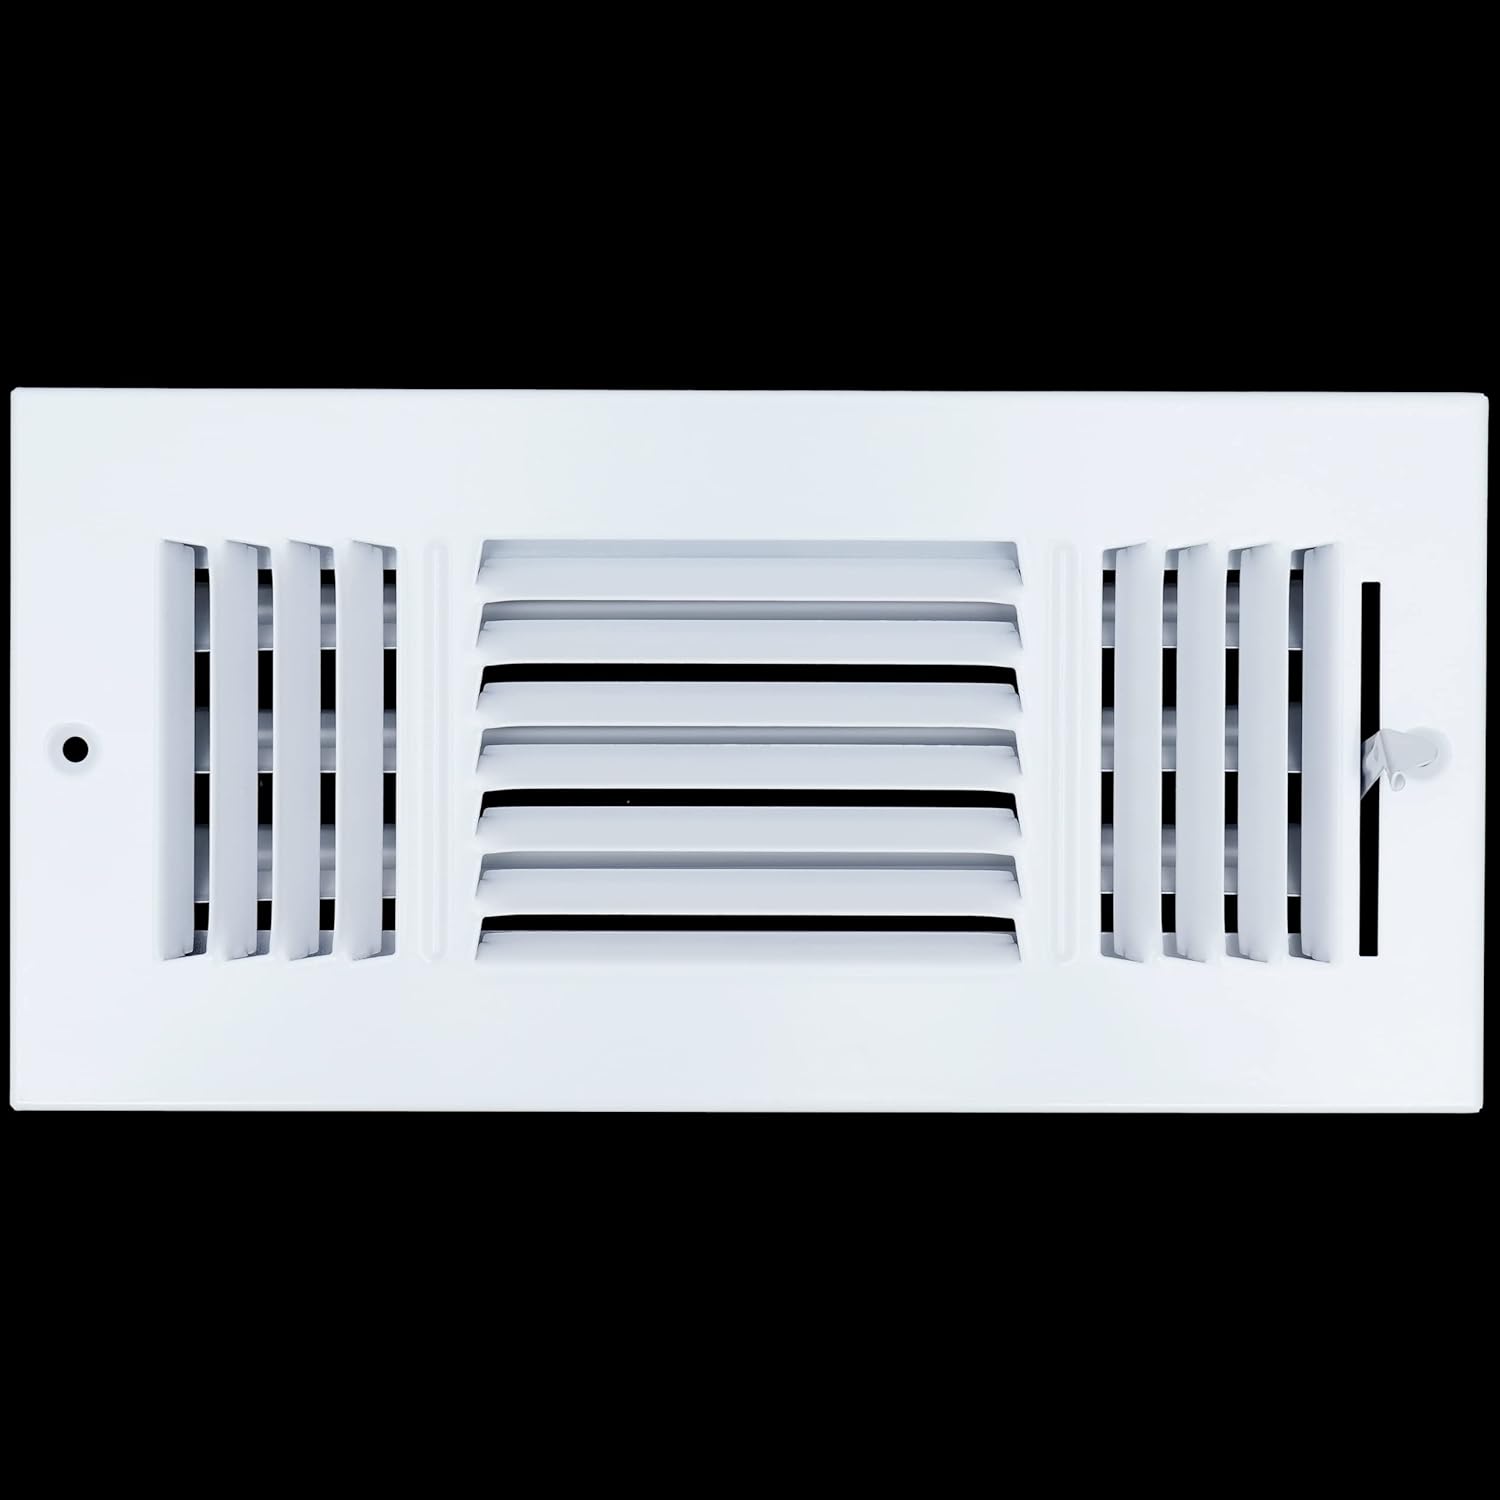 Handua 10"W x 4"H [Duct Opening Measurements] 3 Way Steel Air Supply Diffuser | Register Vent Cover Grill for Sidewall and C